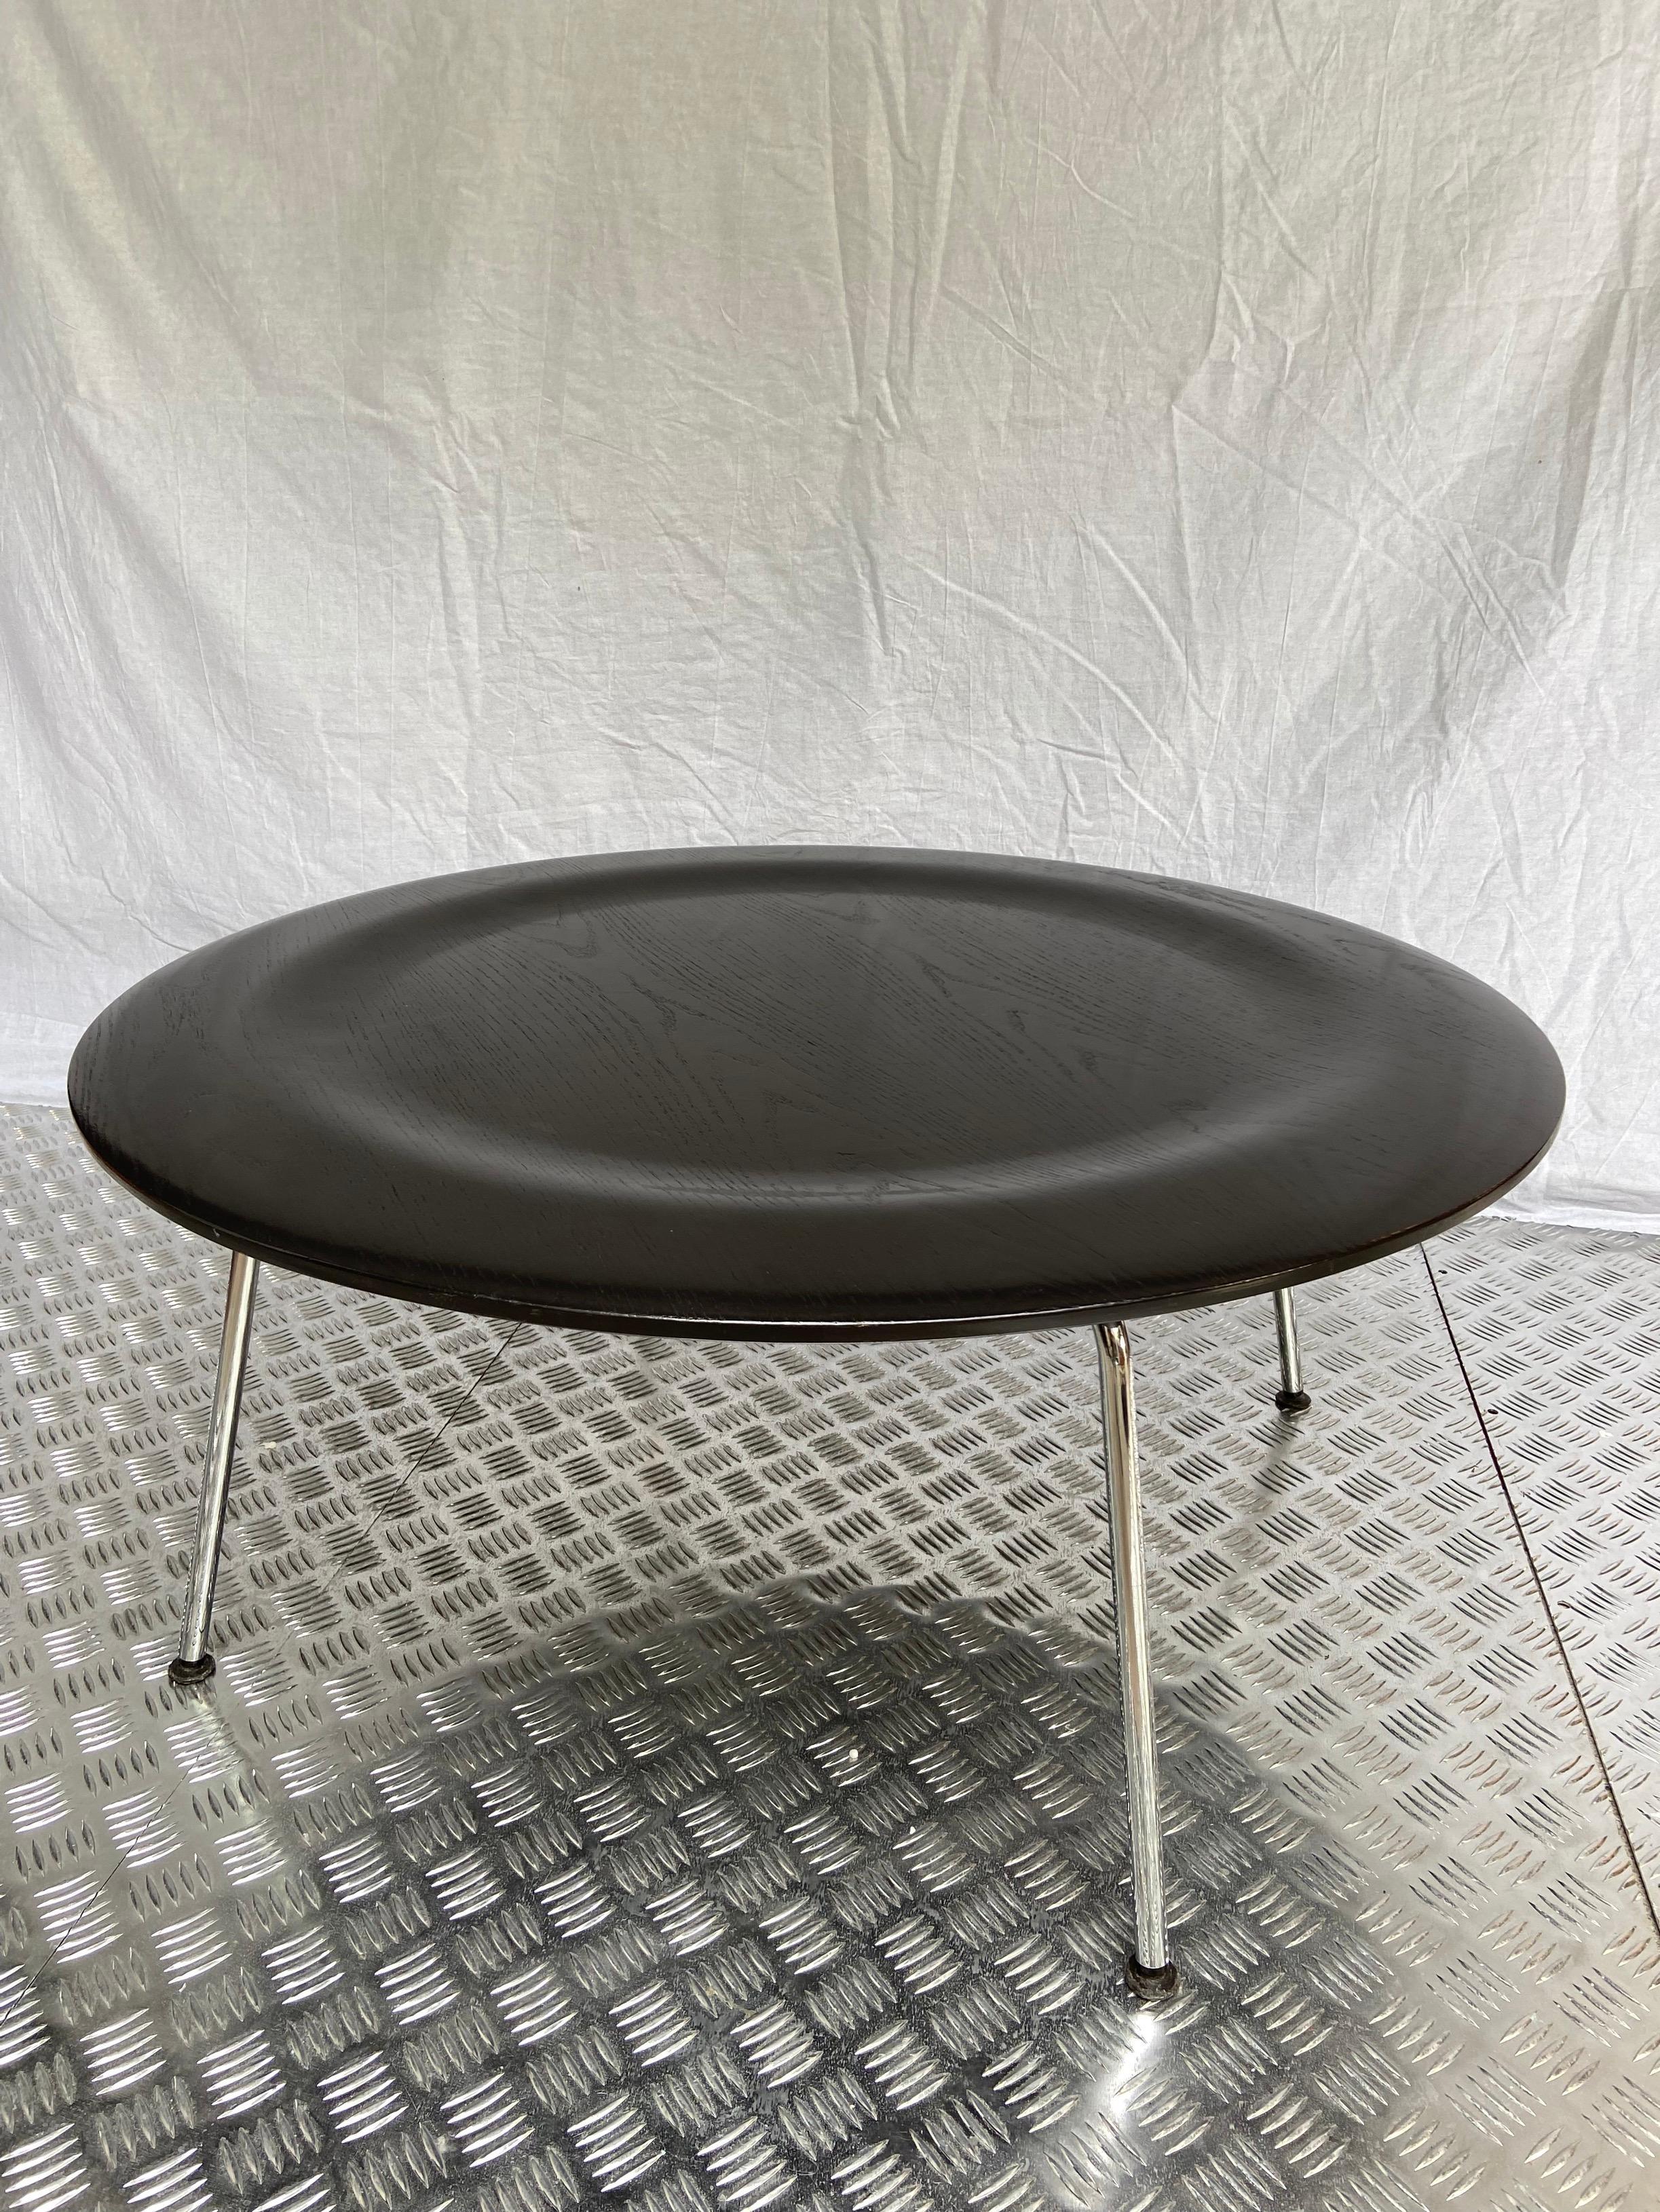 CTM coffee table - Charles and Ray Eames - Circa 1970
Molded plywood from dark ash and chrome steel
Herman Miller Edition
Measures: H39xD87.